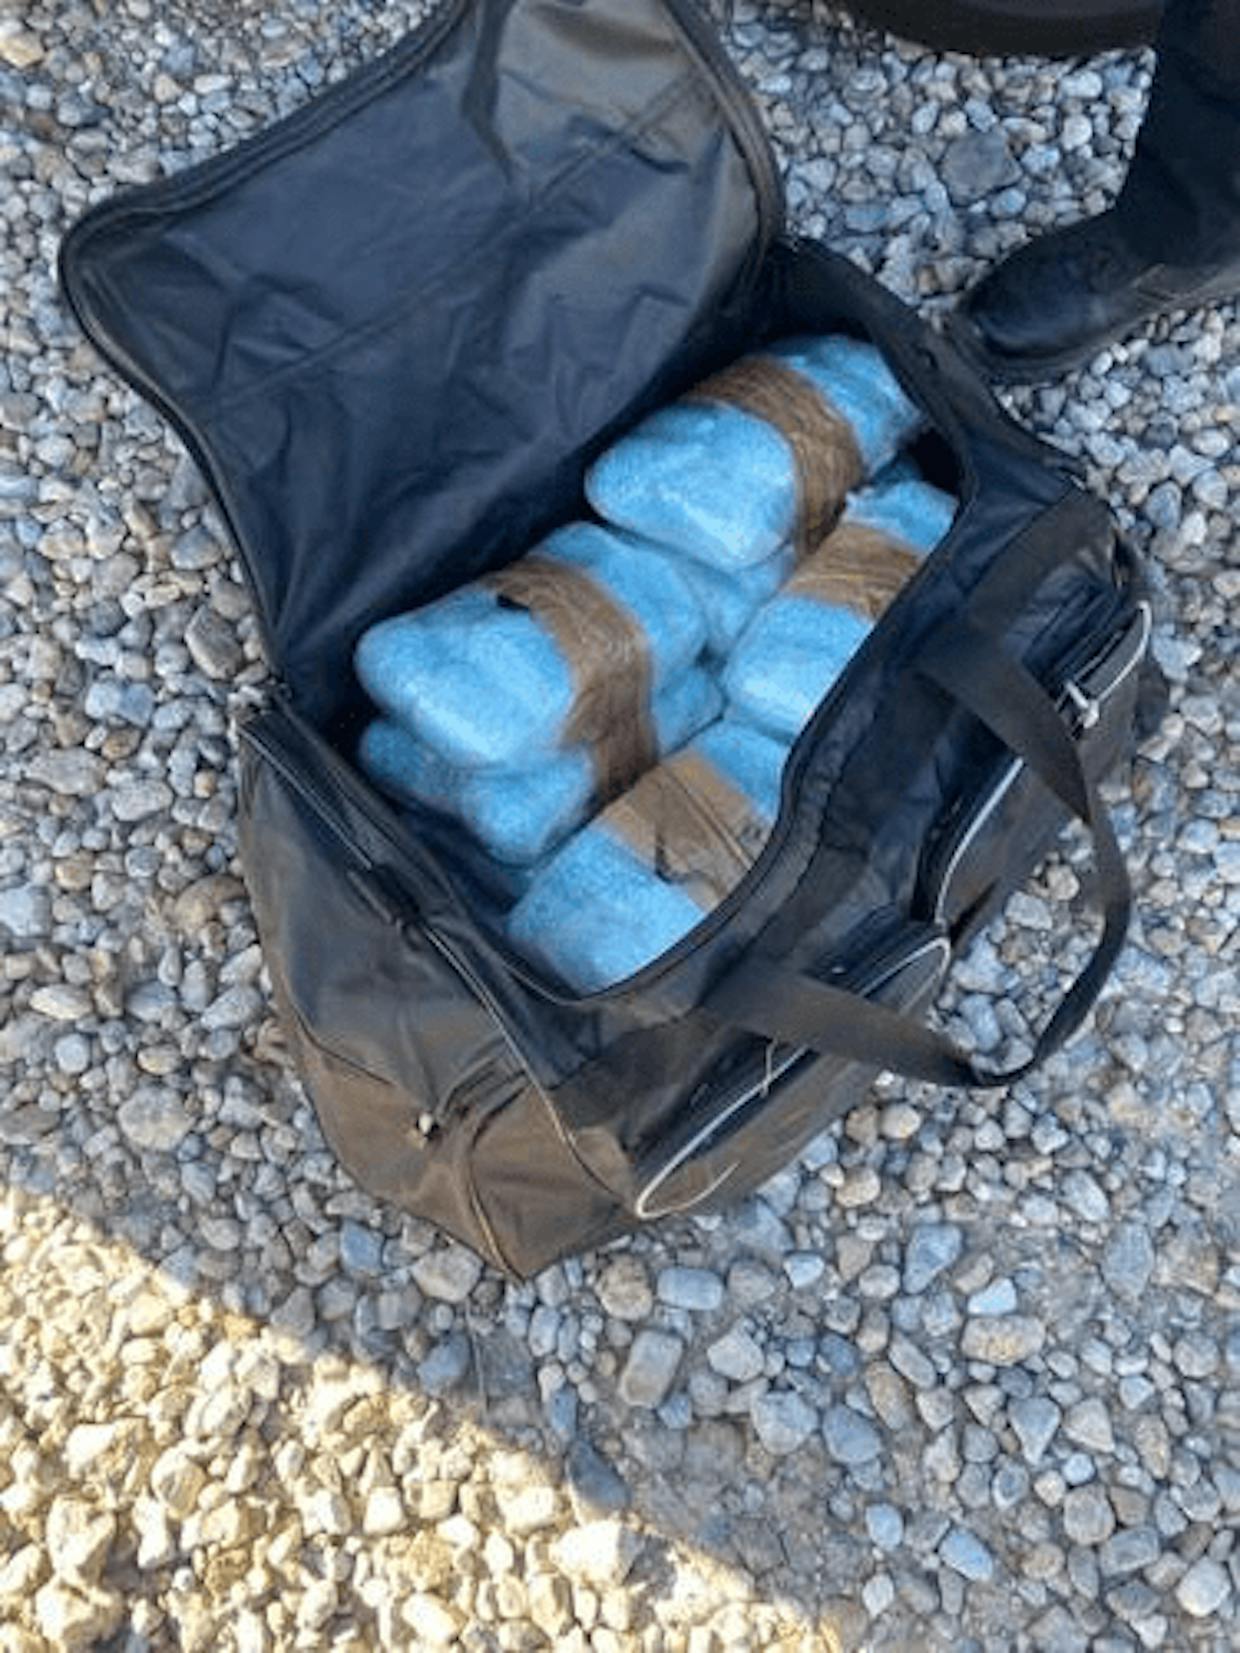 One of the duffel bags containing fentanyl pills. (Sahuarita Police Department)